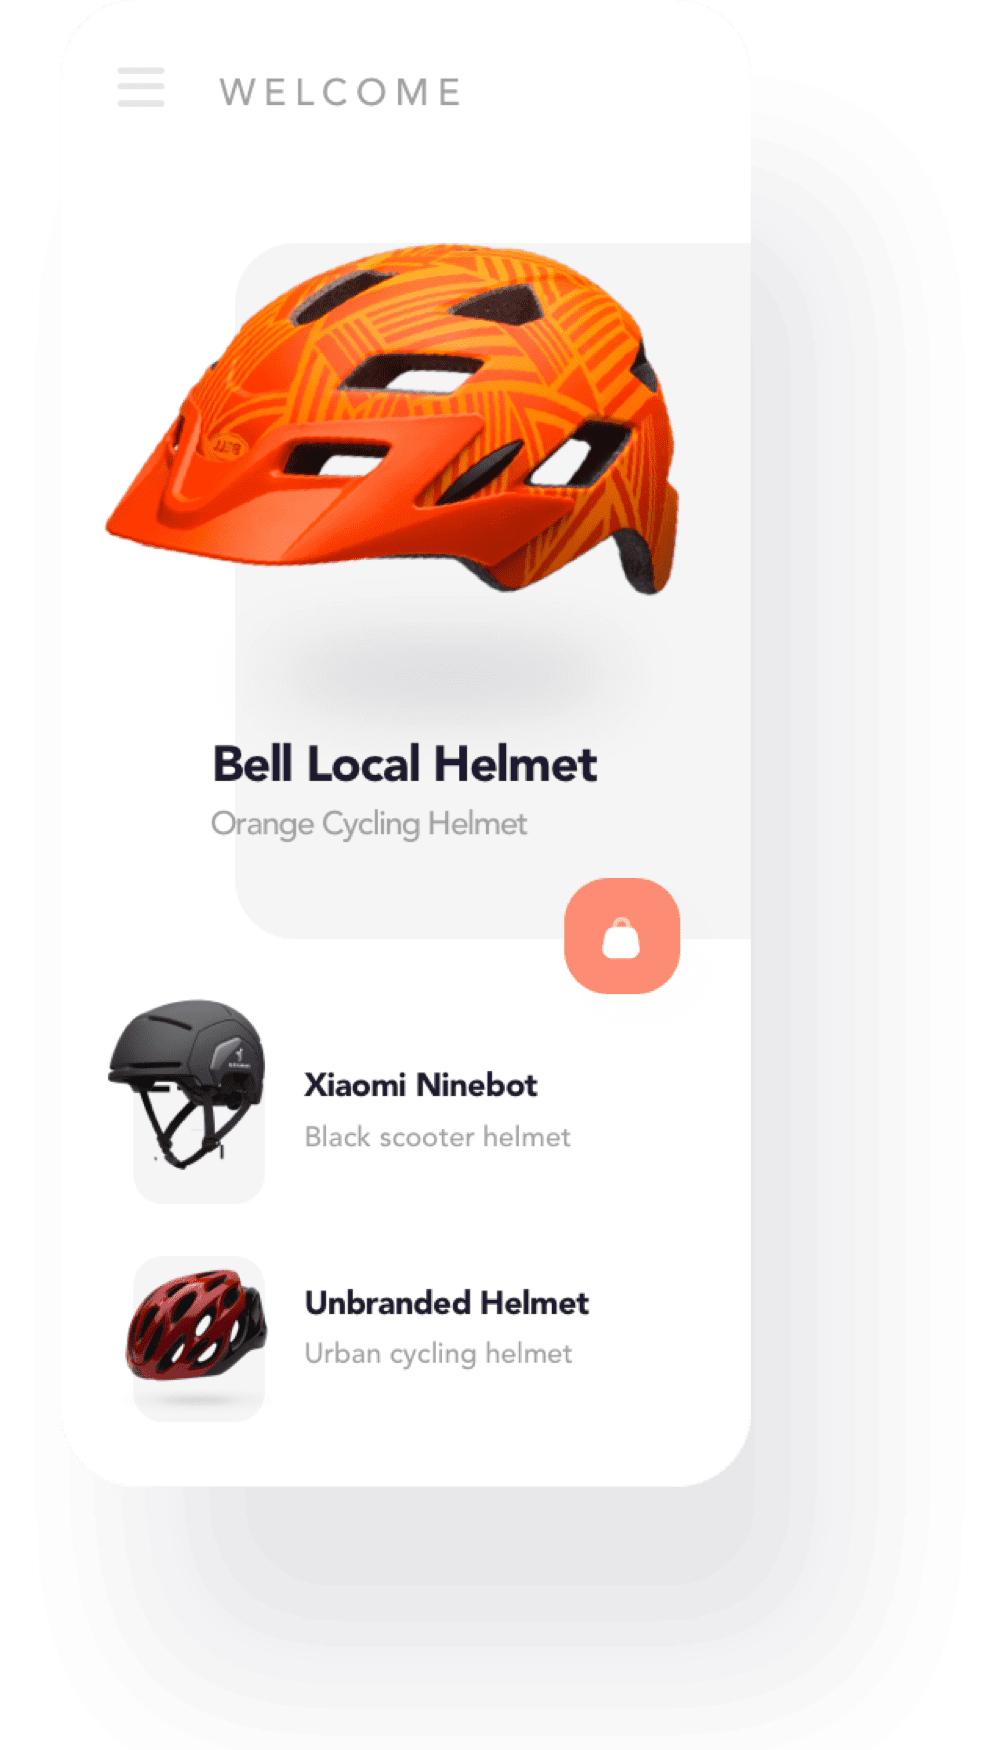 Helmet app design on phone screen. User interface displays various features and settings for helmet customization.